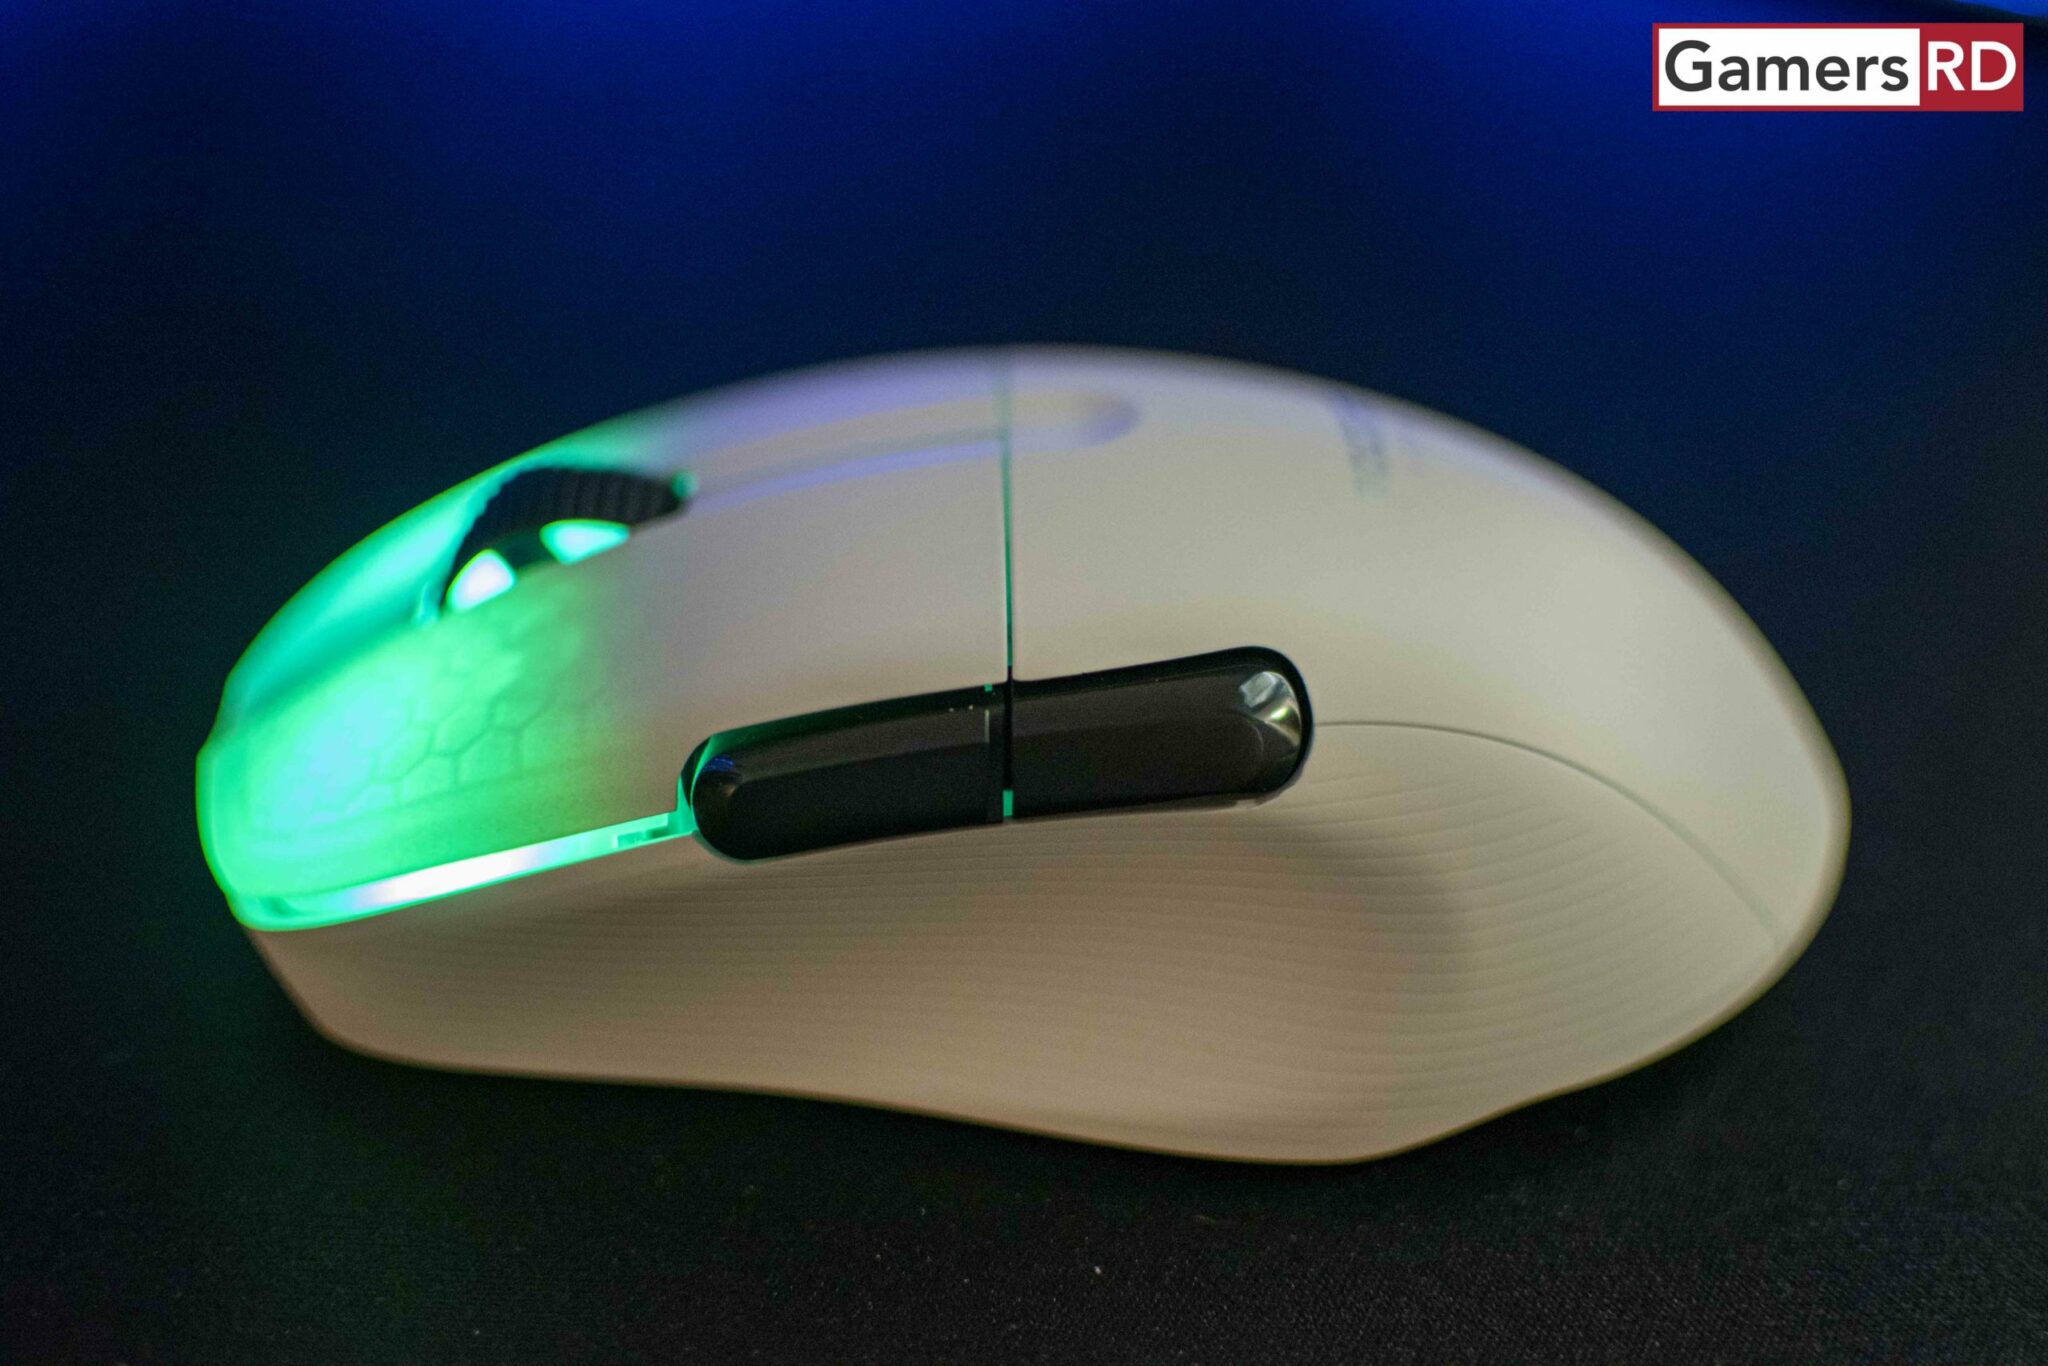 ROCCAT Kone Pro Air Gaming Mouse Review, 4 GamersRD